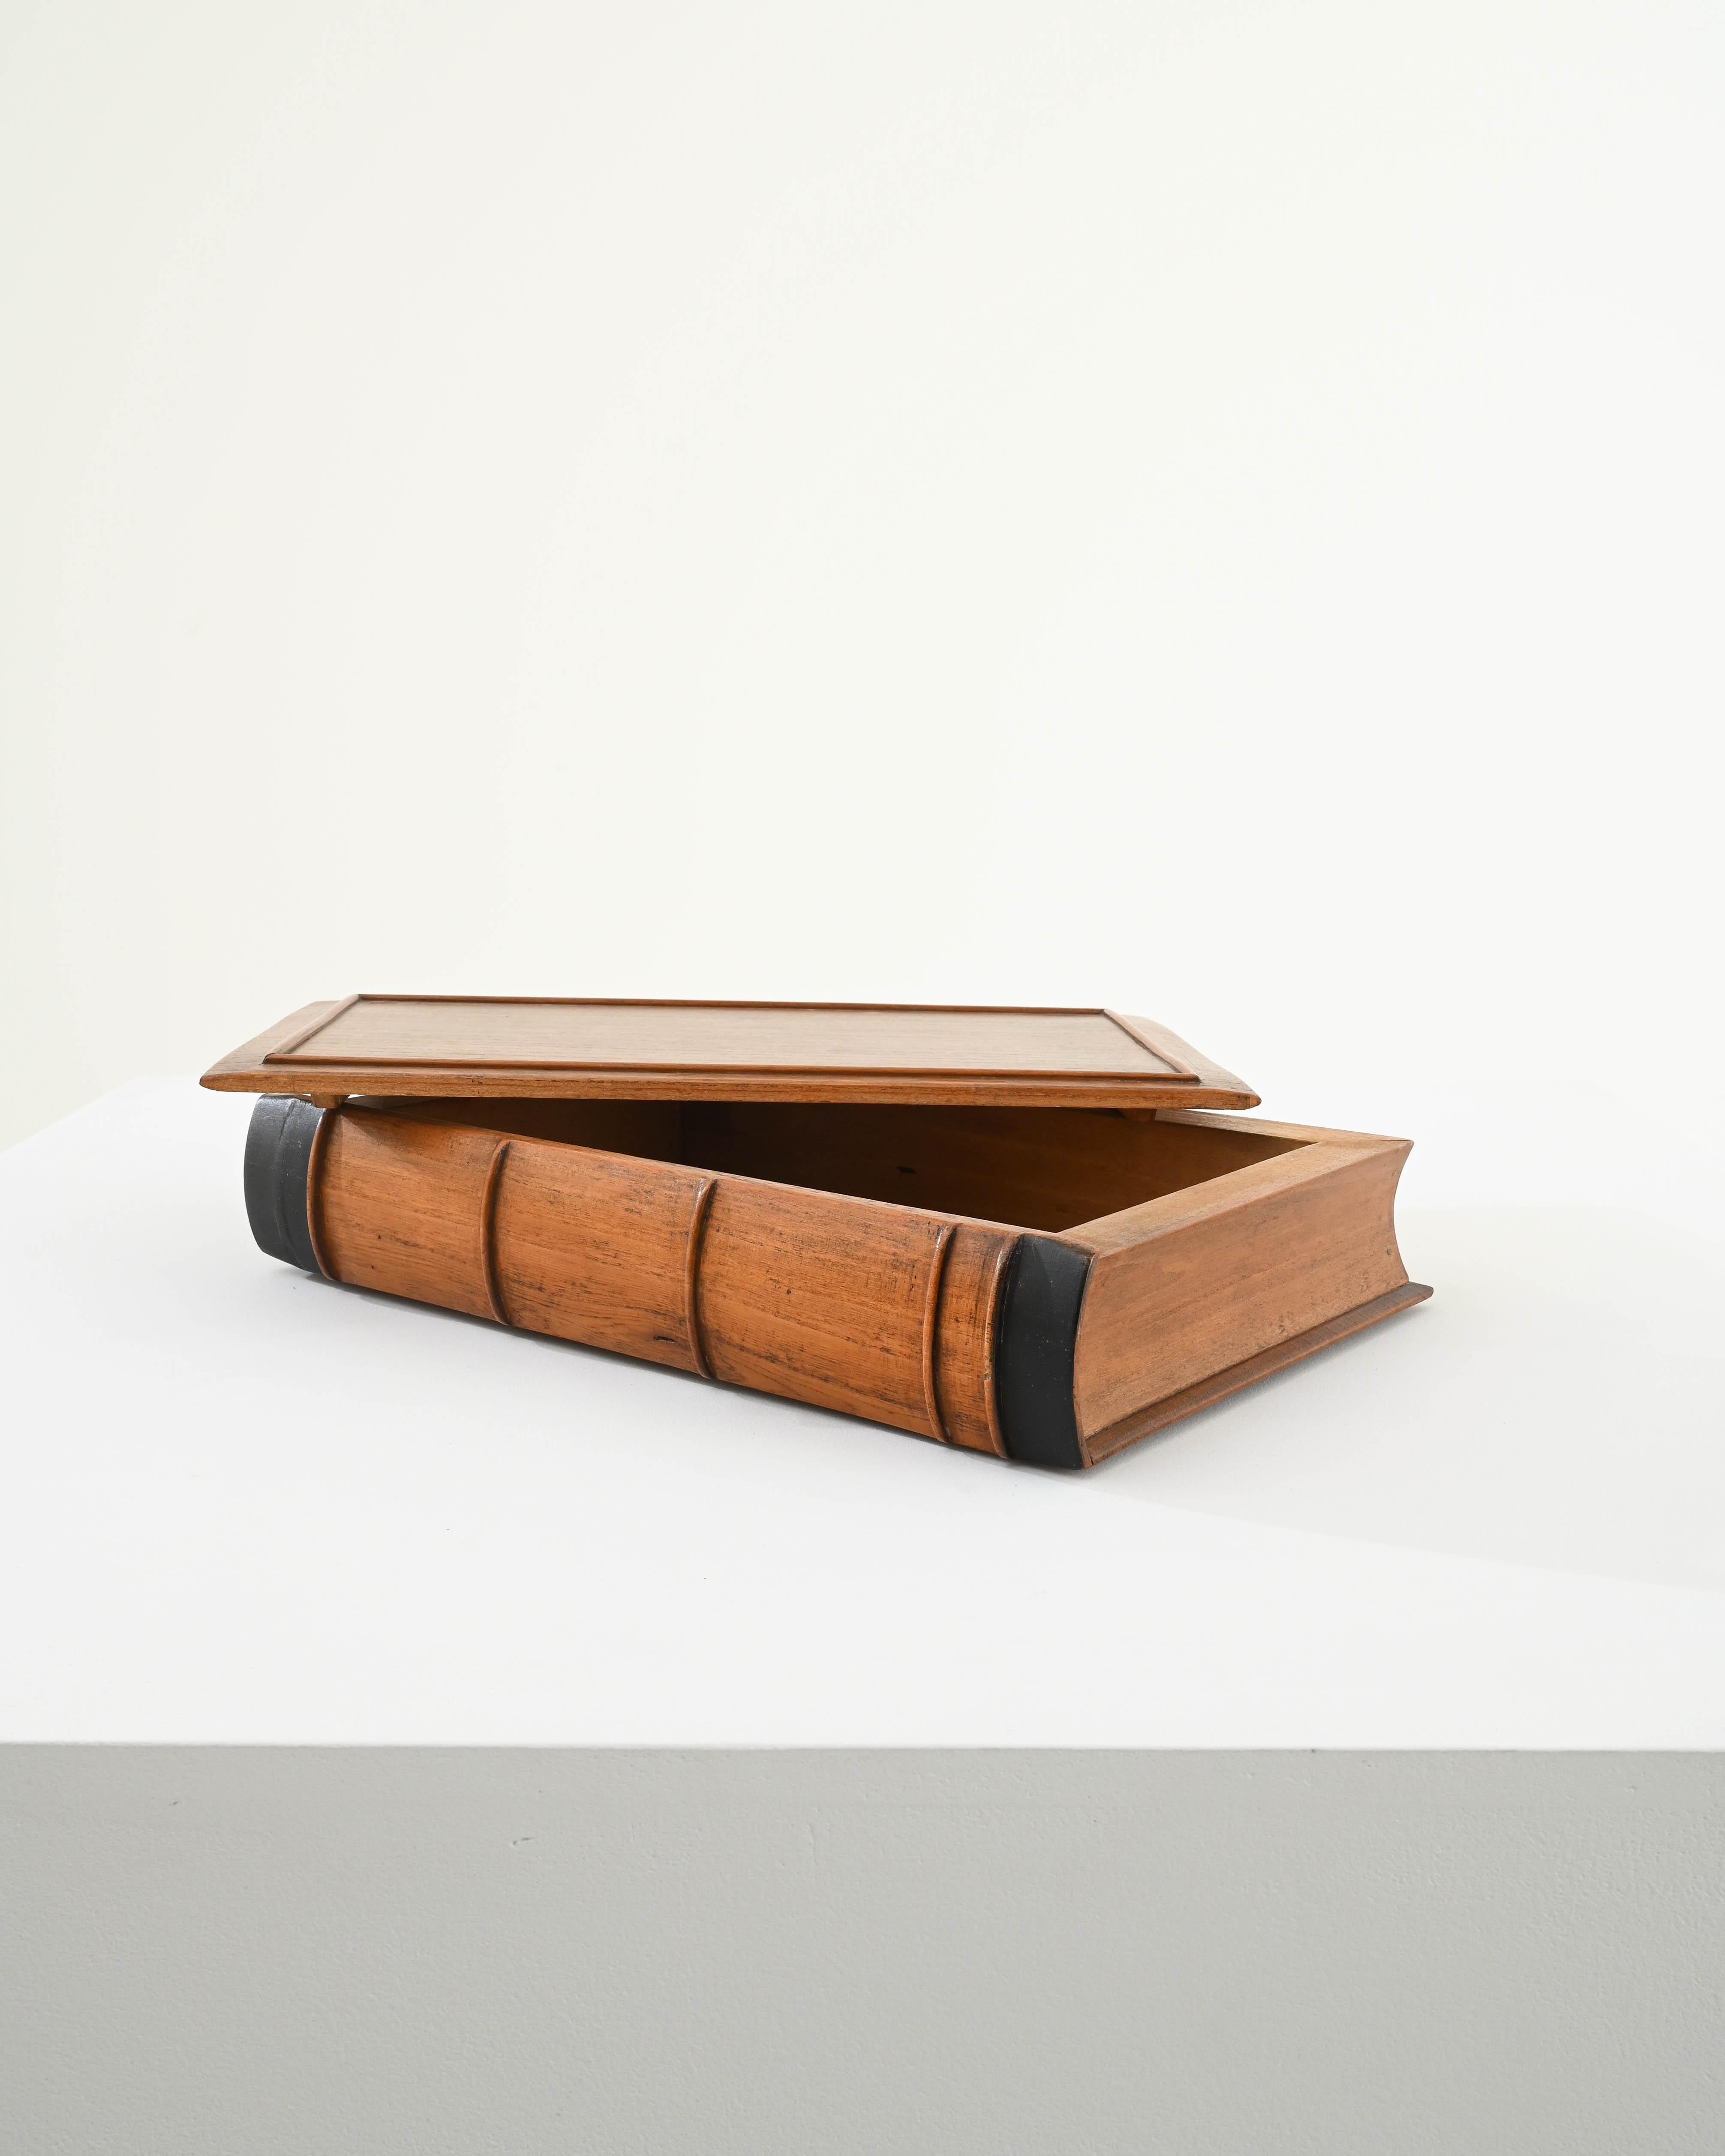 20th Century Vintage Wooden Book-Shaped Box